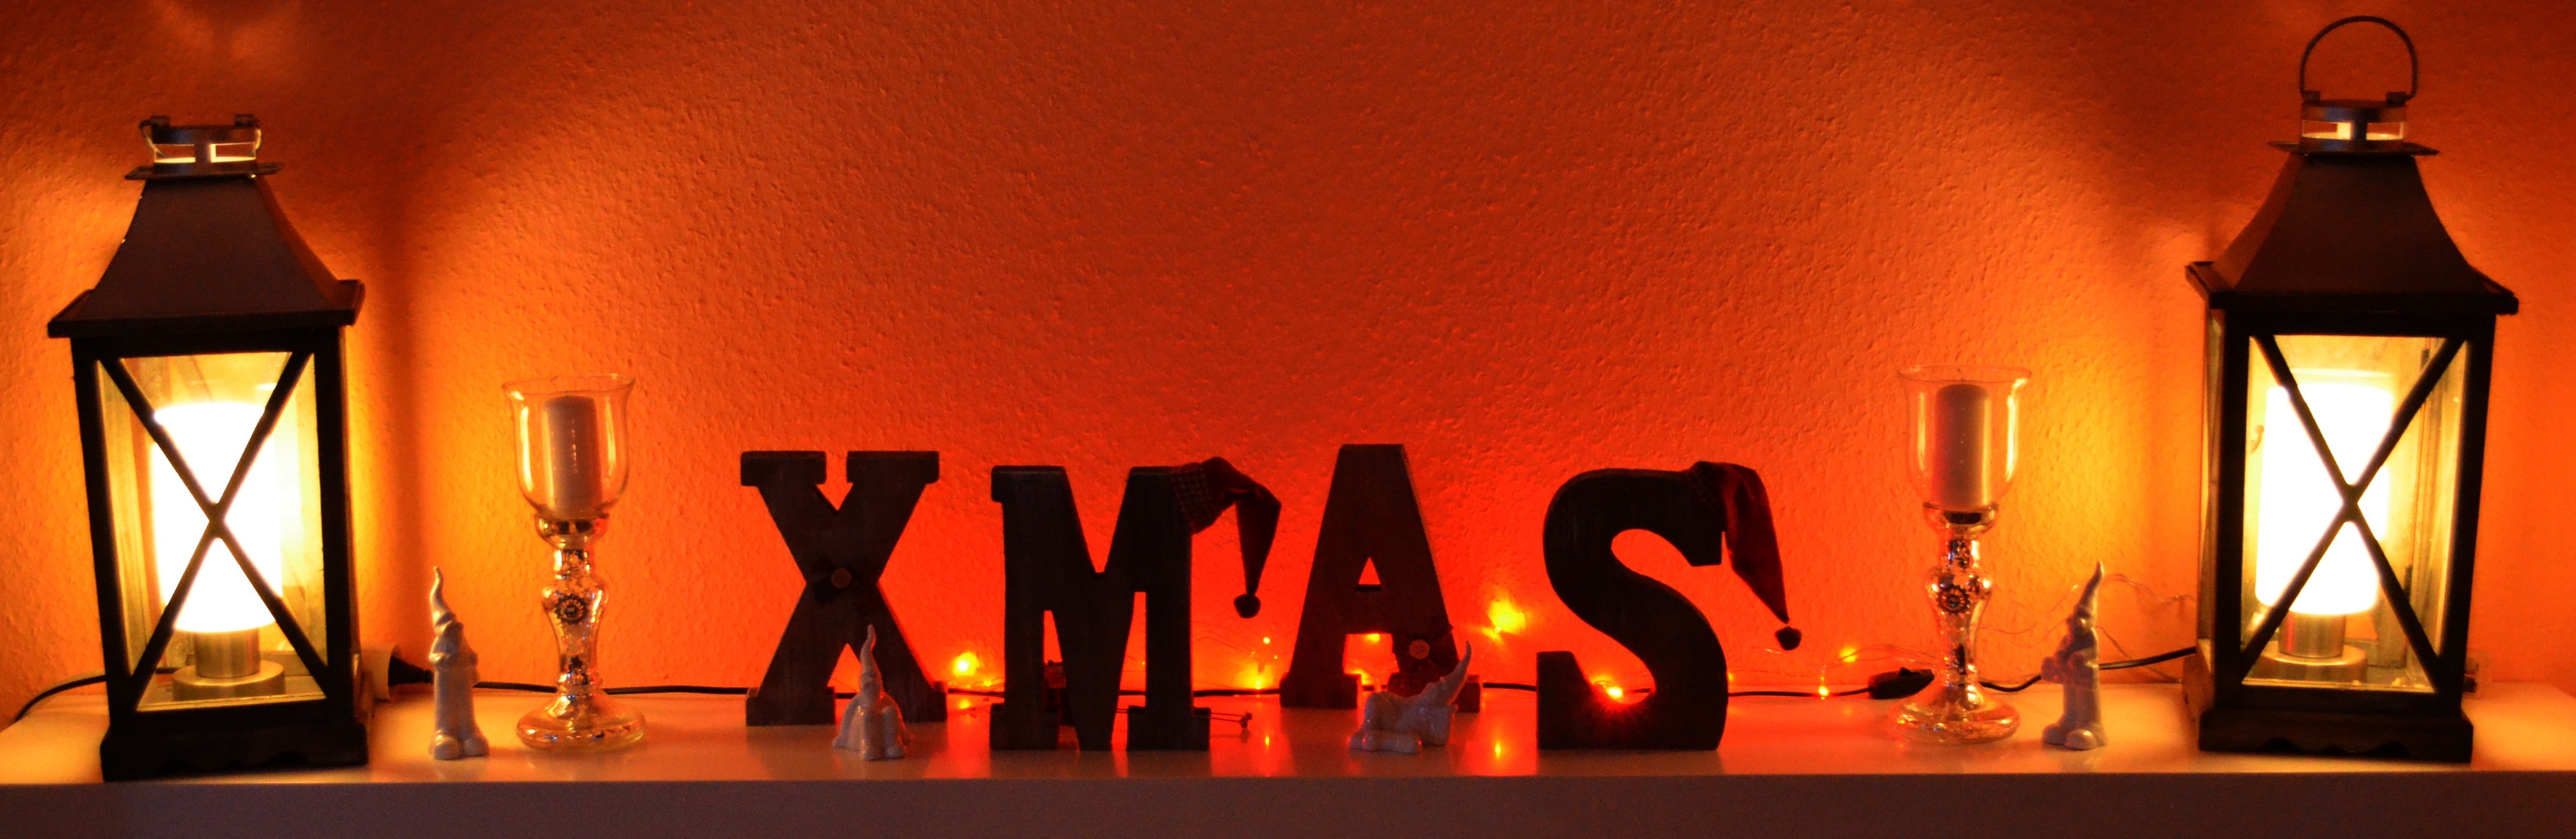 XMAS free standing letters